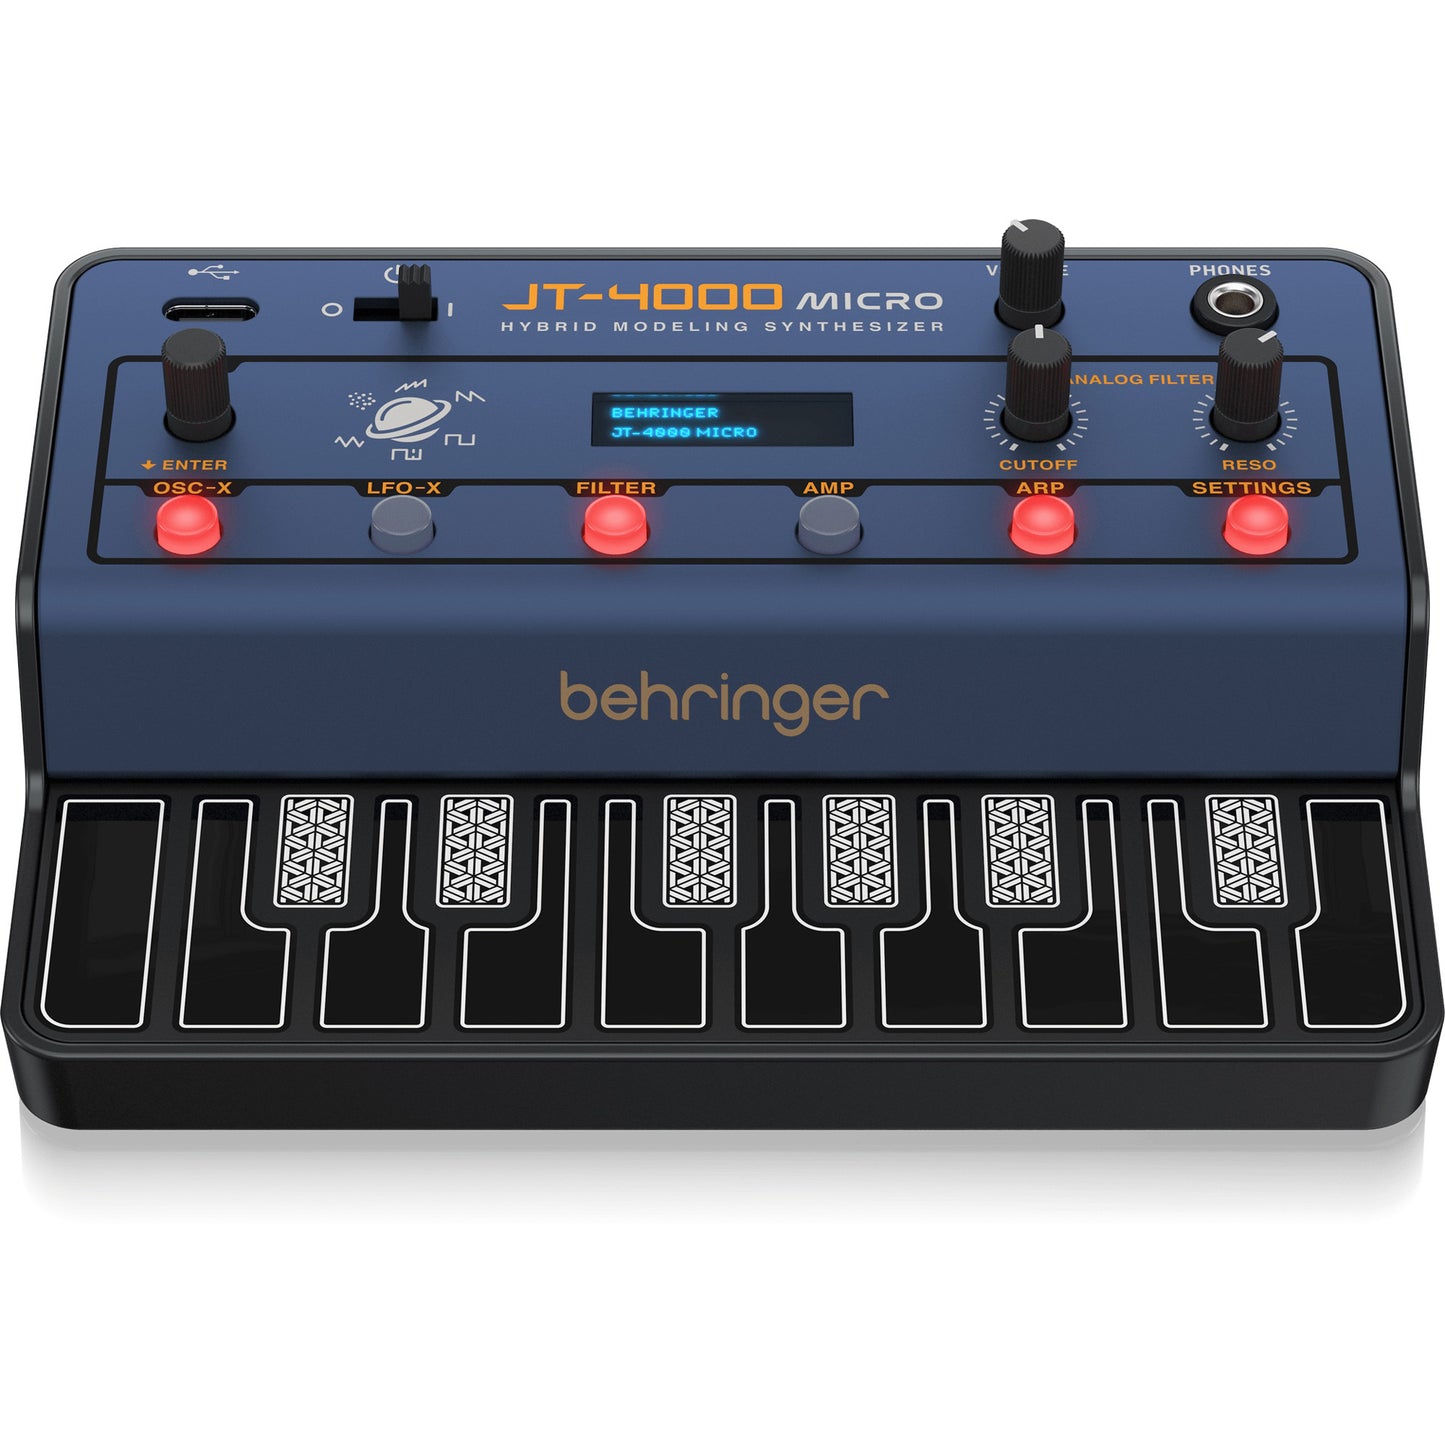 Behringer JT-4000 Micro Portable 4 Voice Hybrid Synthesizer